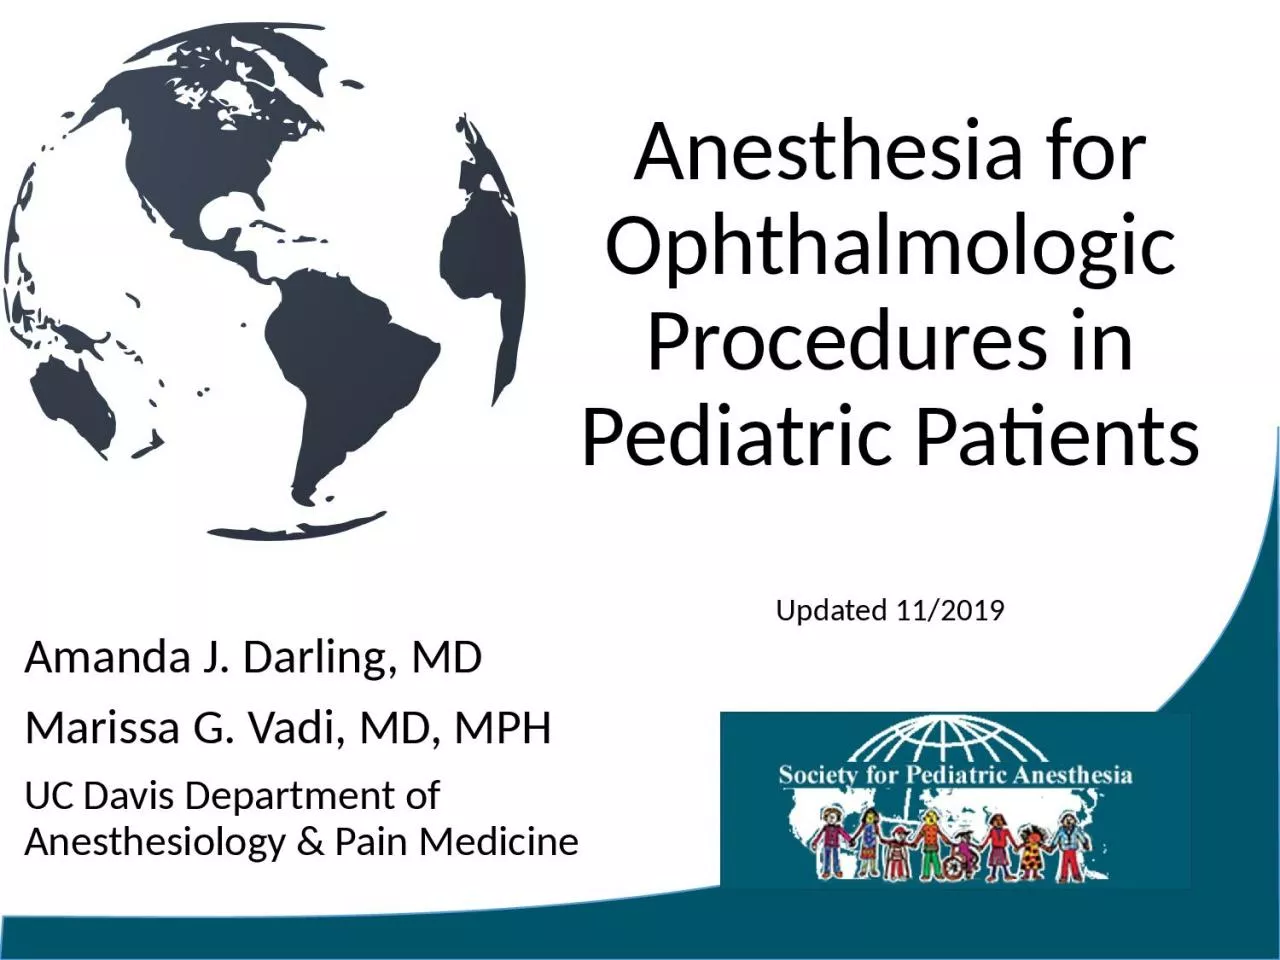 Anesthesia for Ophthalmologic Procedures in Pediatric Patients